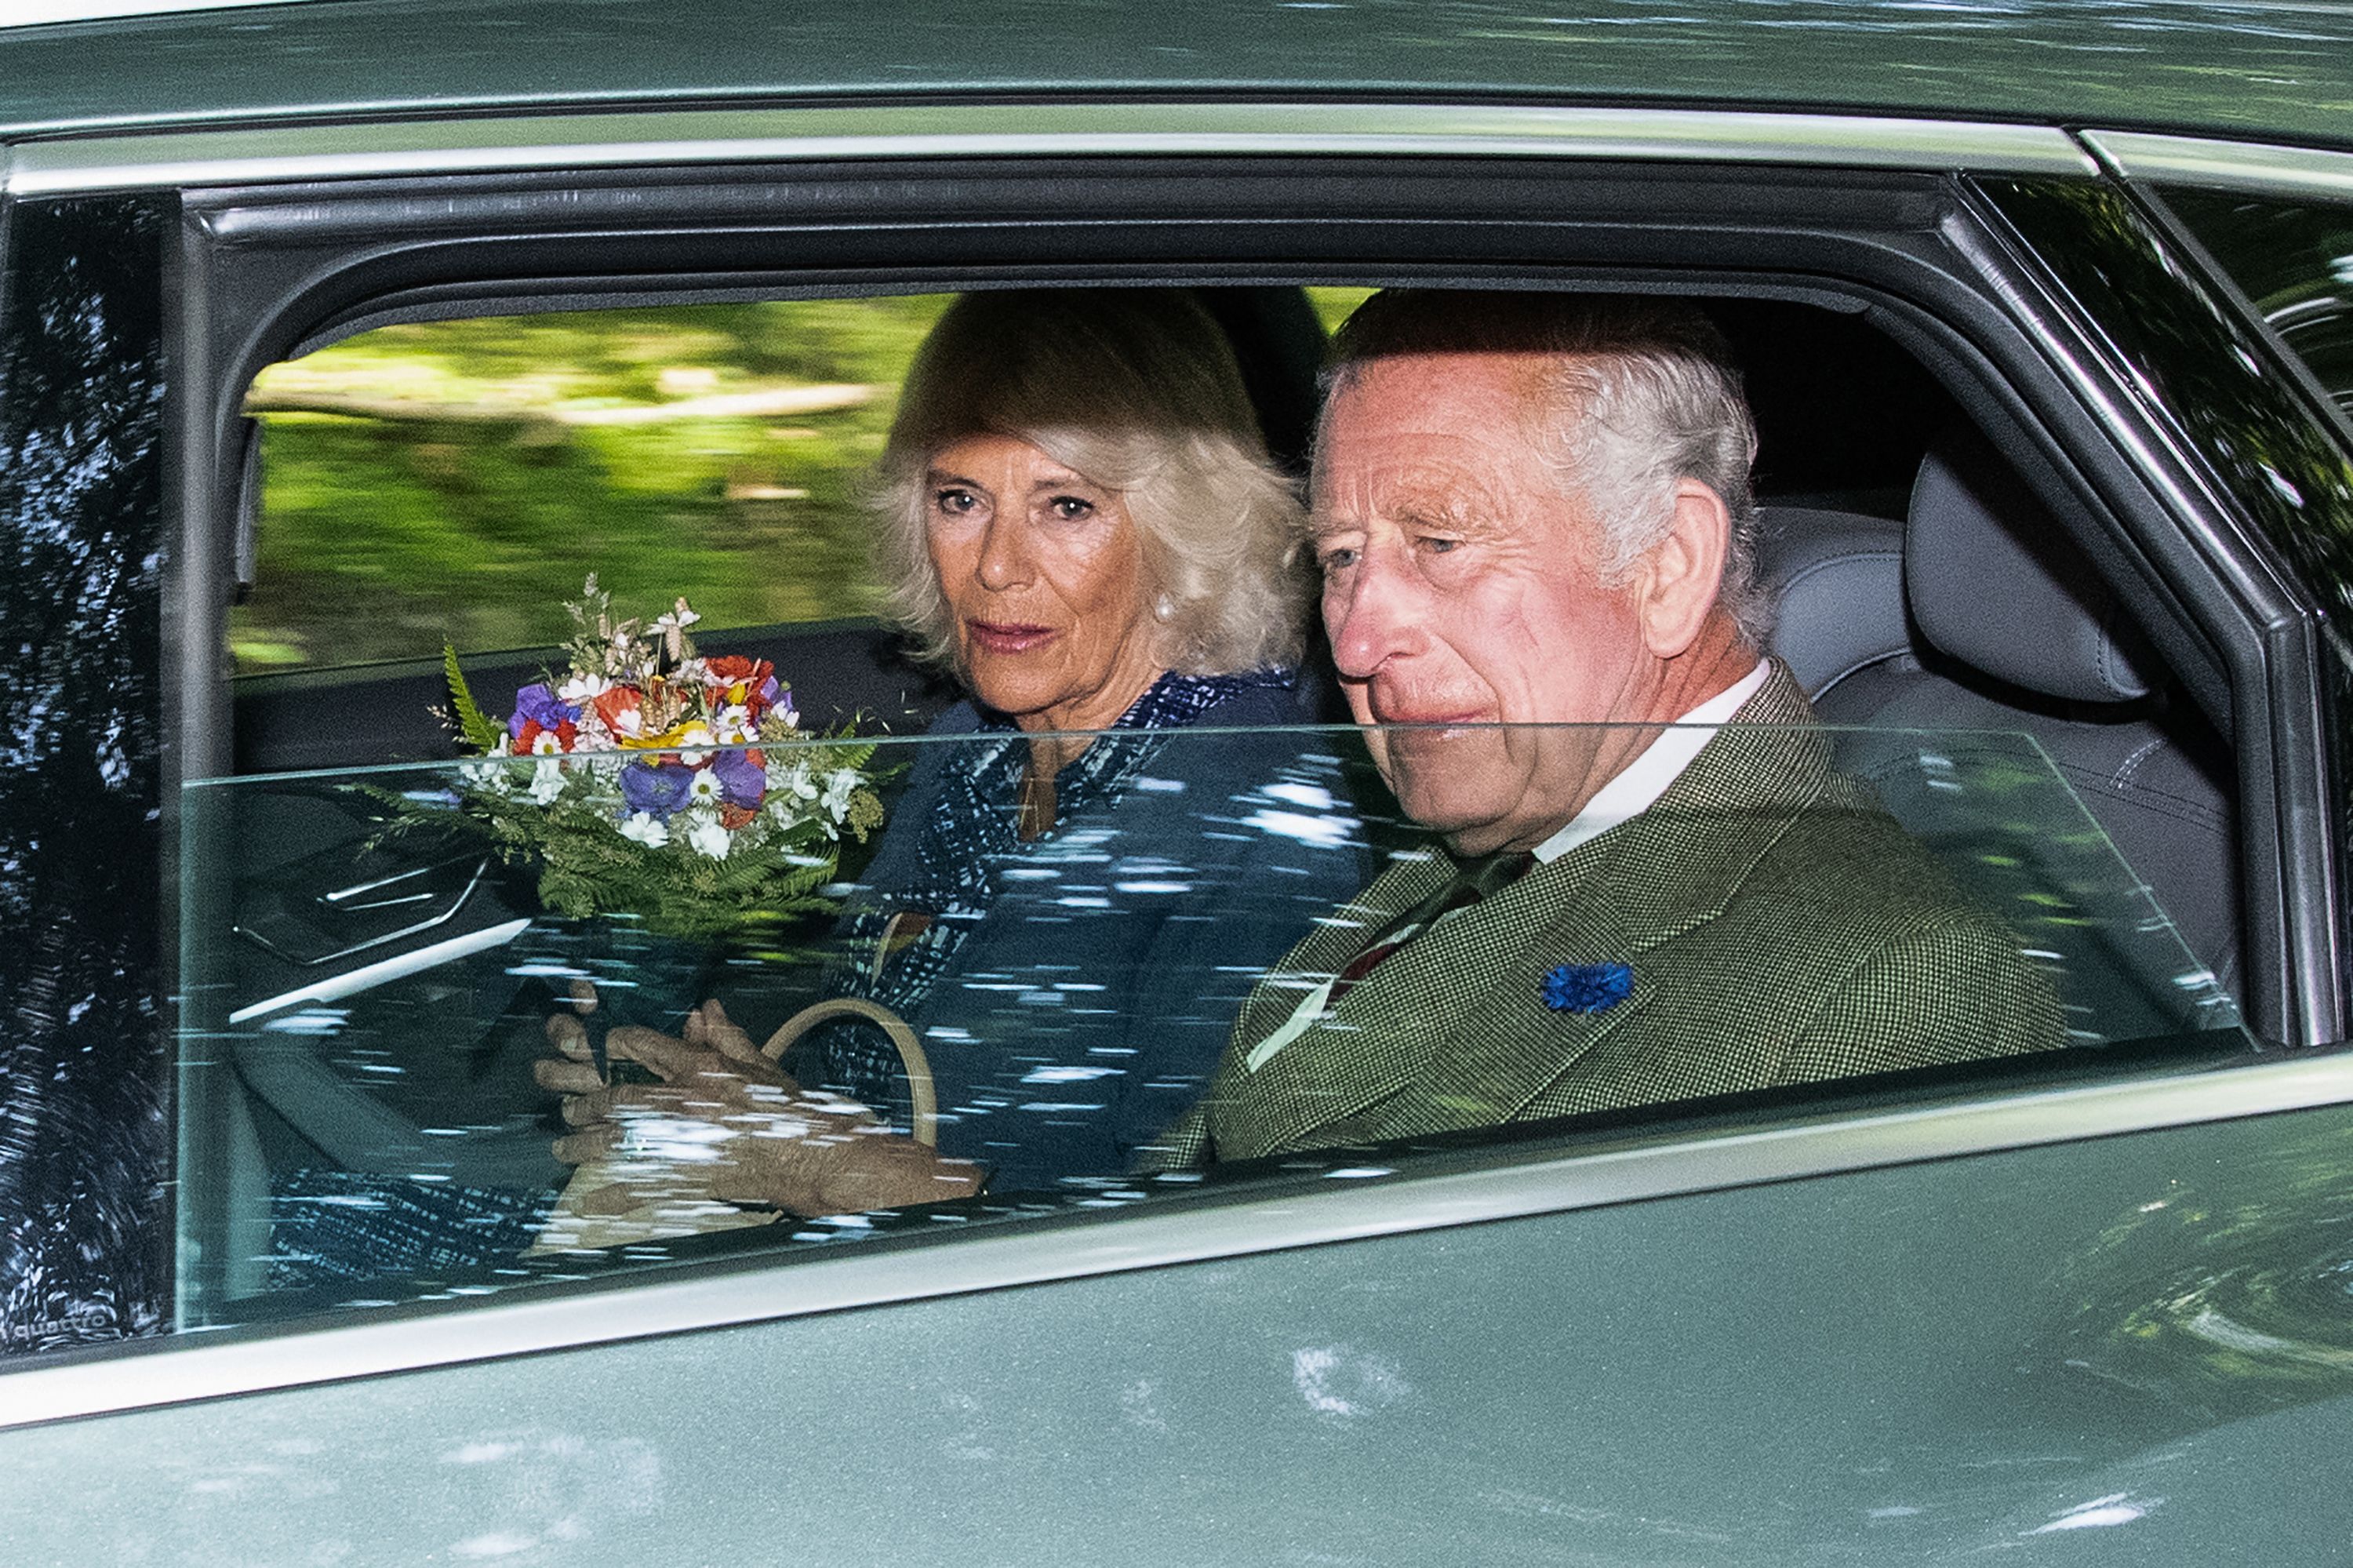 King Charles III and Queen Camilla leave after attending church in the village of Crathie, near Balmoral on September 8, 2023. | Source: Getty Images